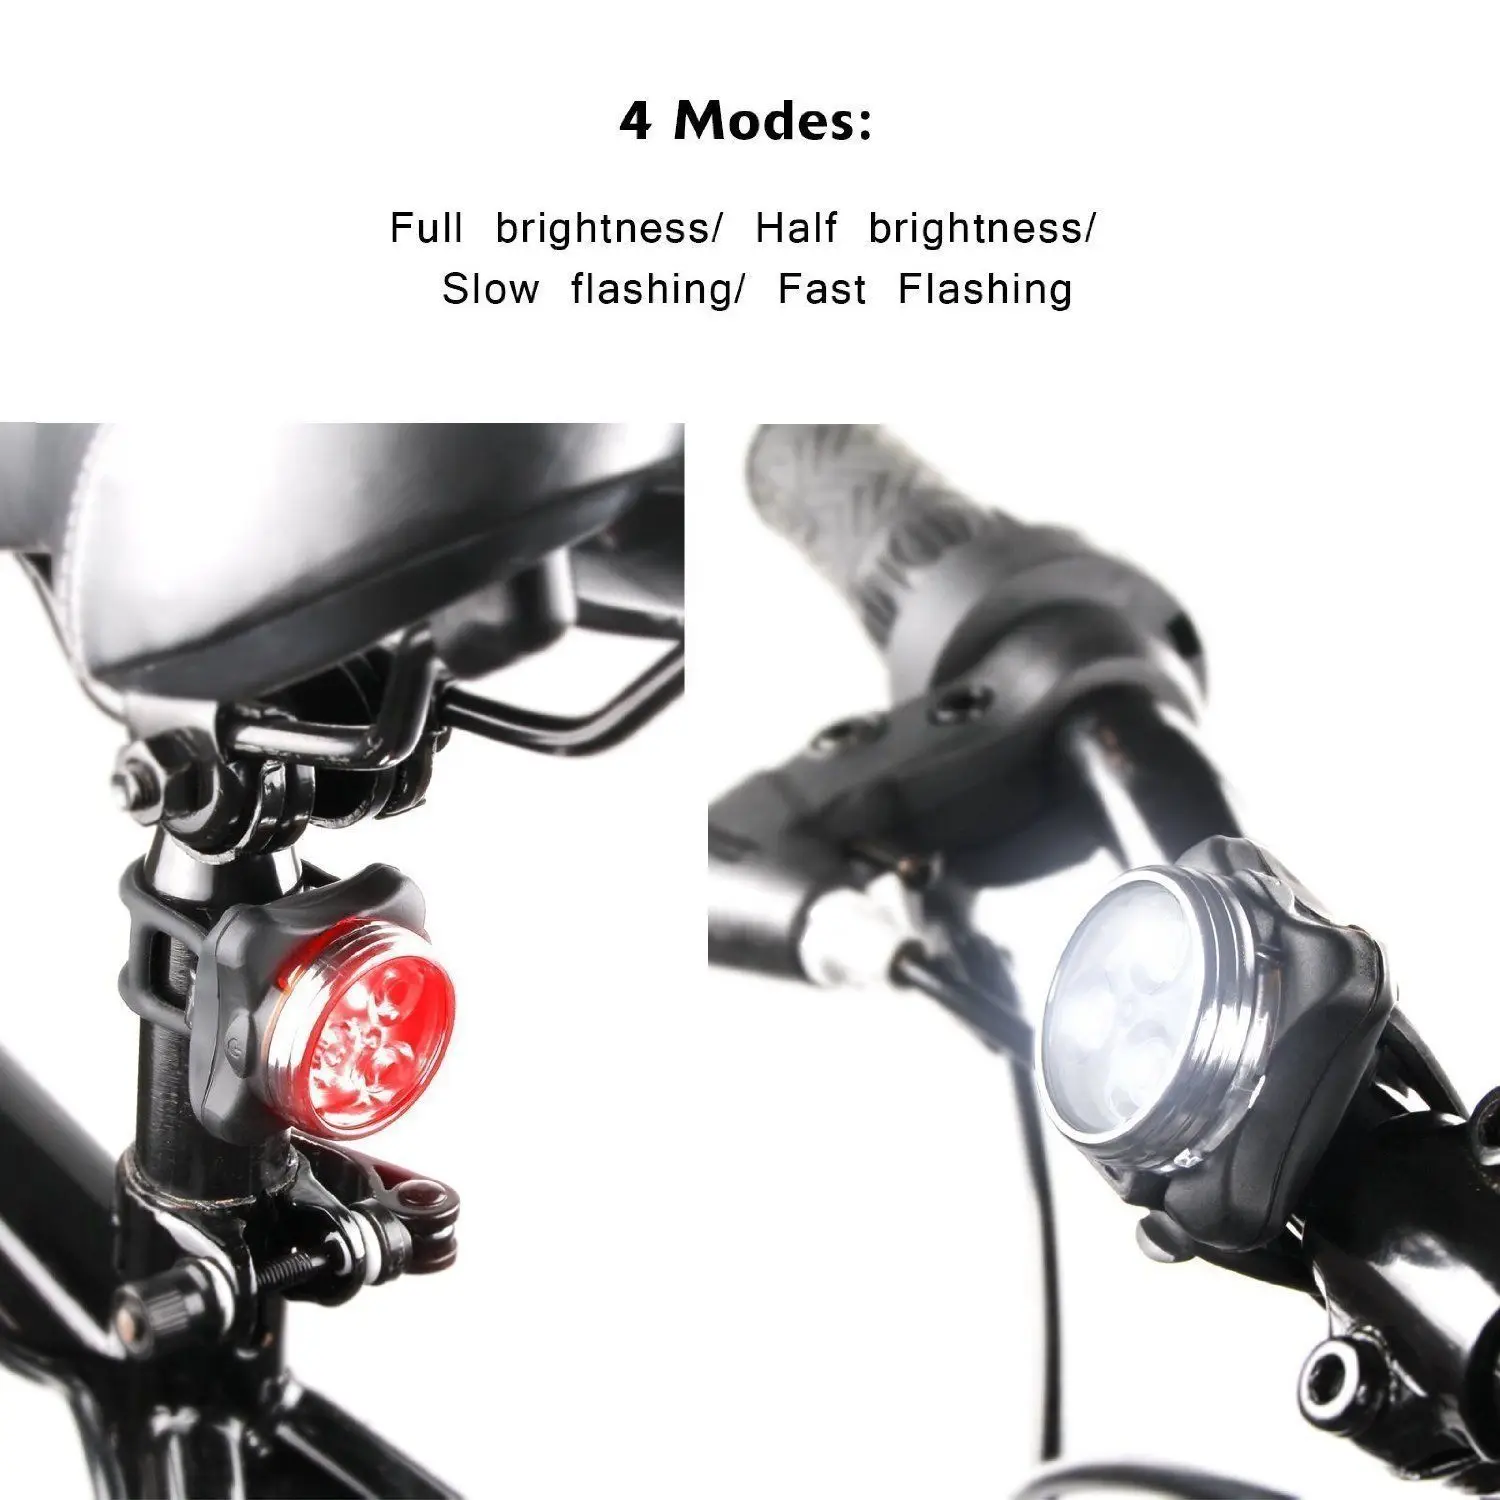 Discount Built-in Battery USB Rechargeable LED Bicycle Light Bike lamp Cycling Set Bright Front Headlight Rear Back Tail Lanterna 4 Modes 10